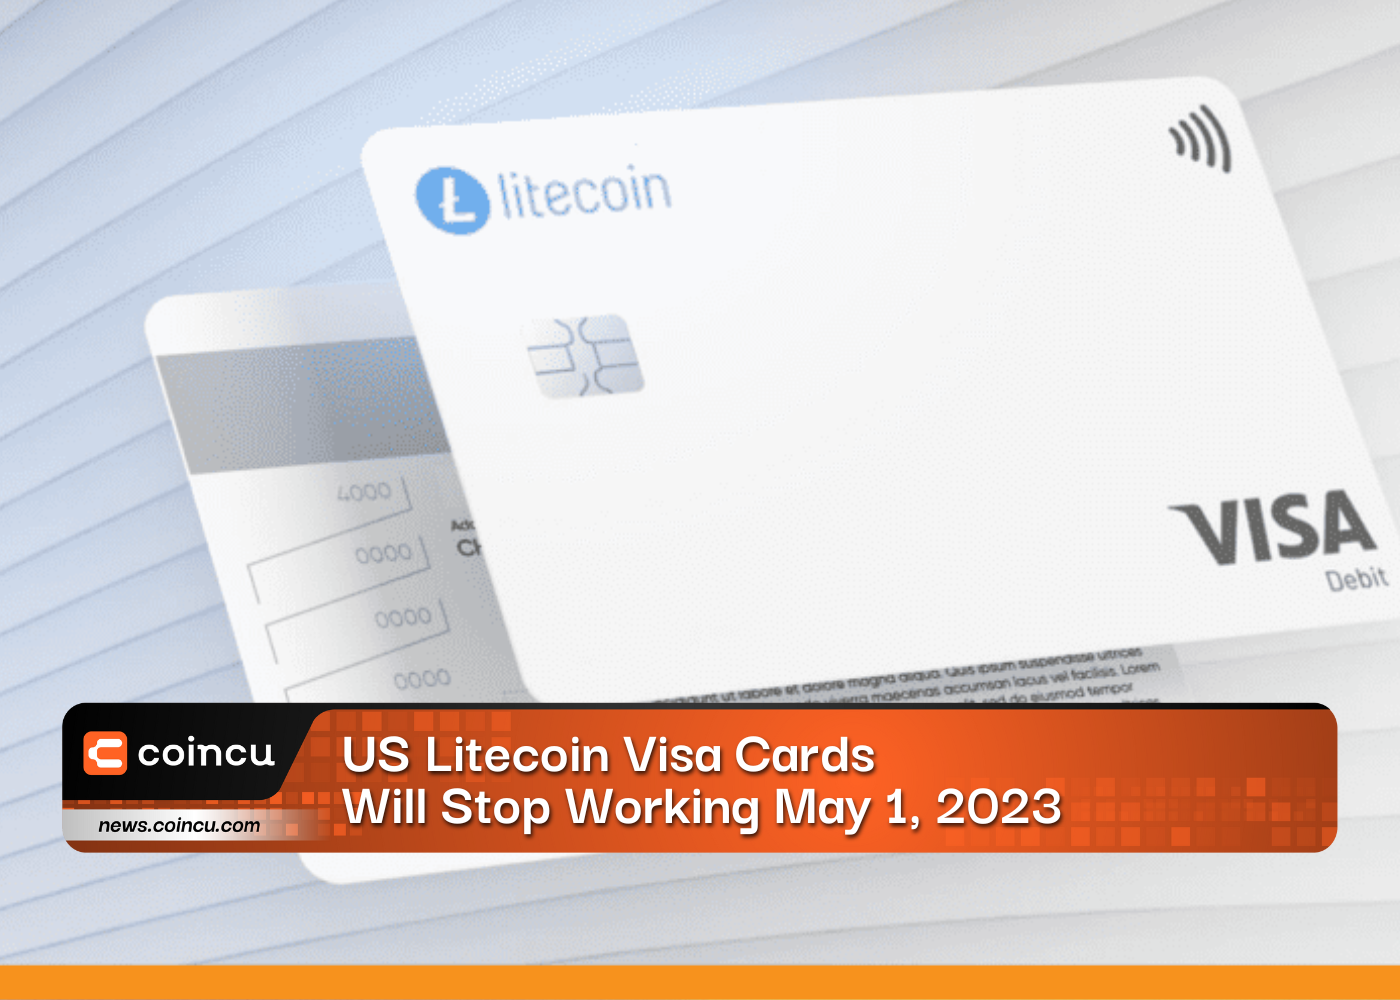 US Litecoin Visa Cards Will Stop Working May 1, 2023